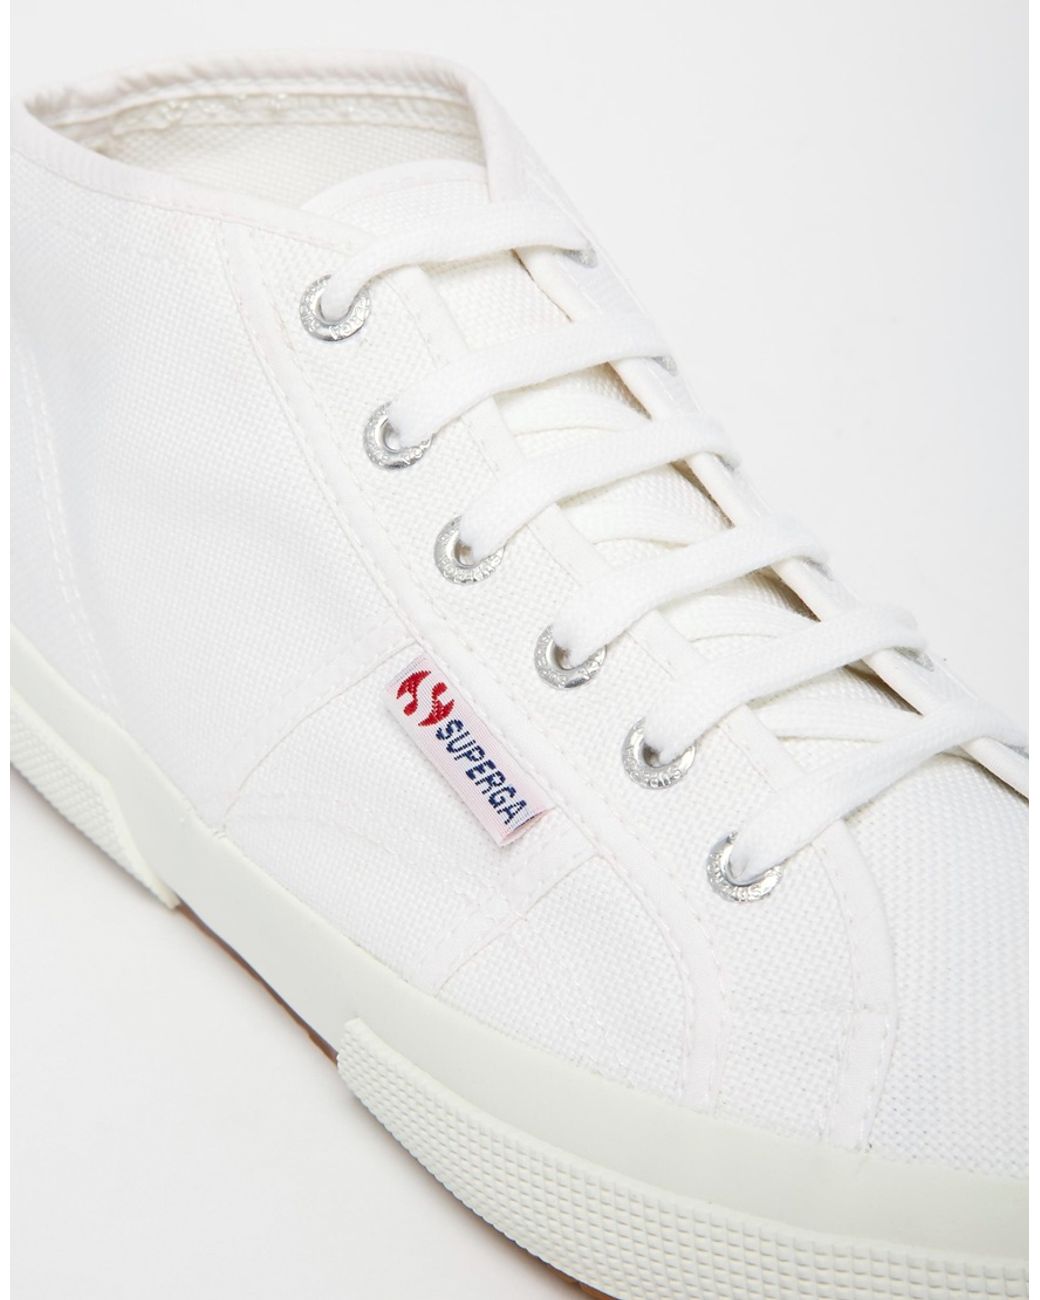 Superga 2754 Mid Sneakers in White for Men | Lyst